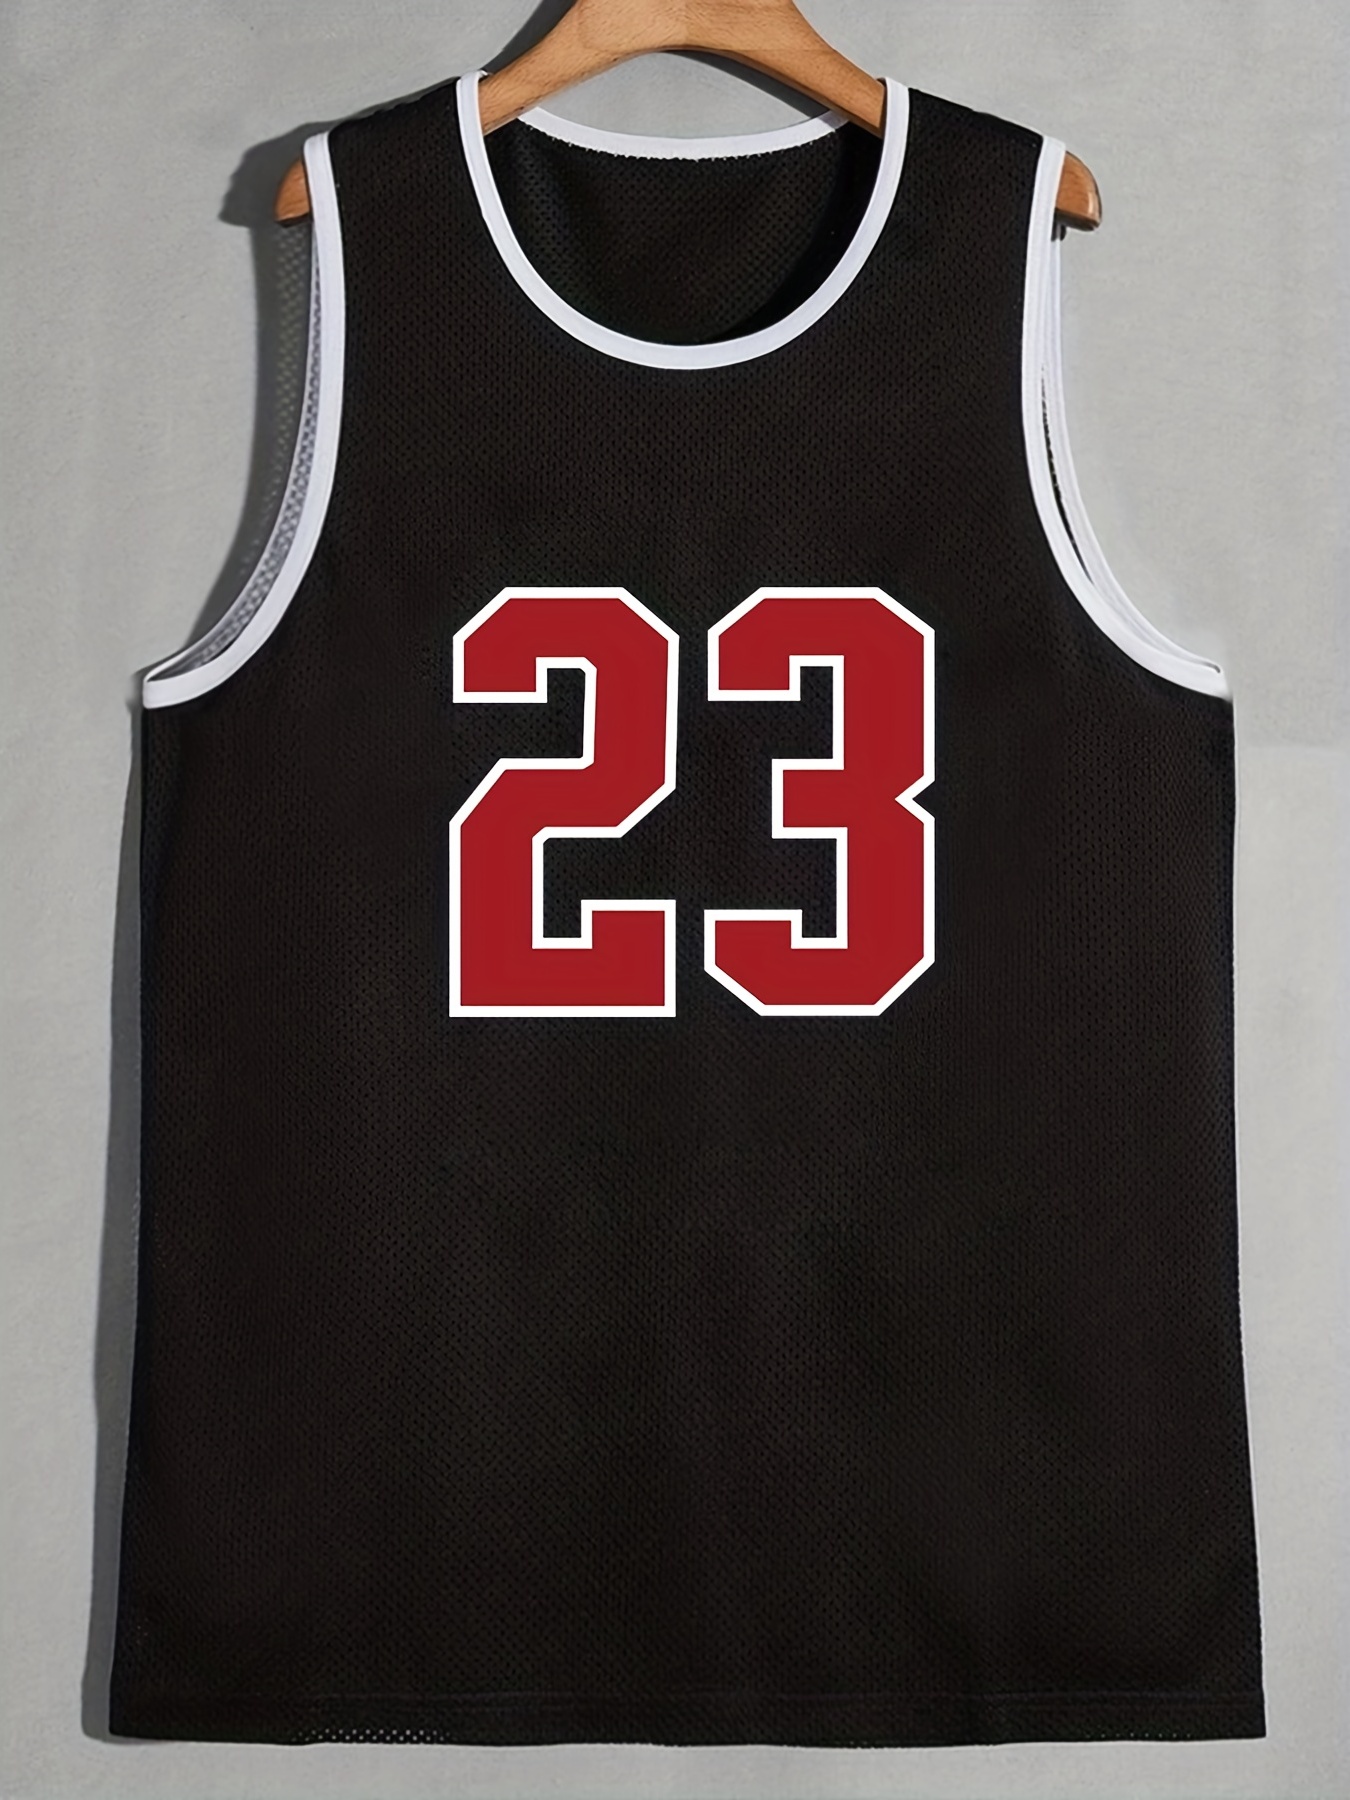 High Quality All-Star Mens Basketball Jersey Breathable Mesh